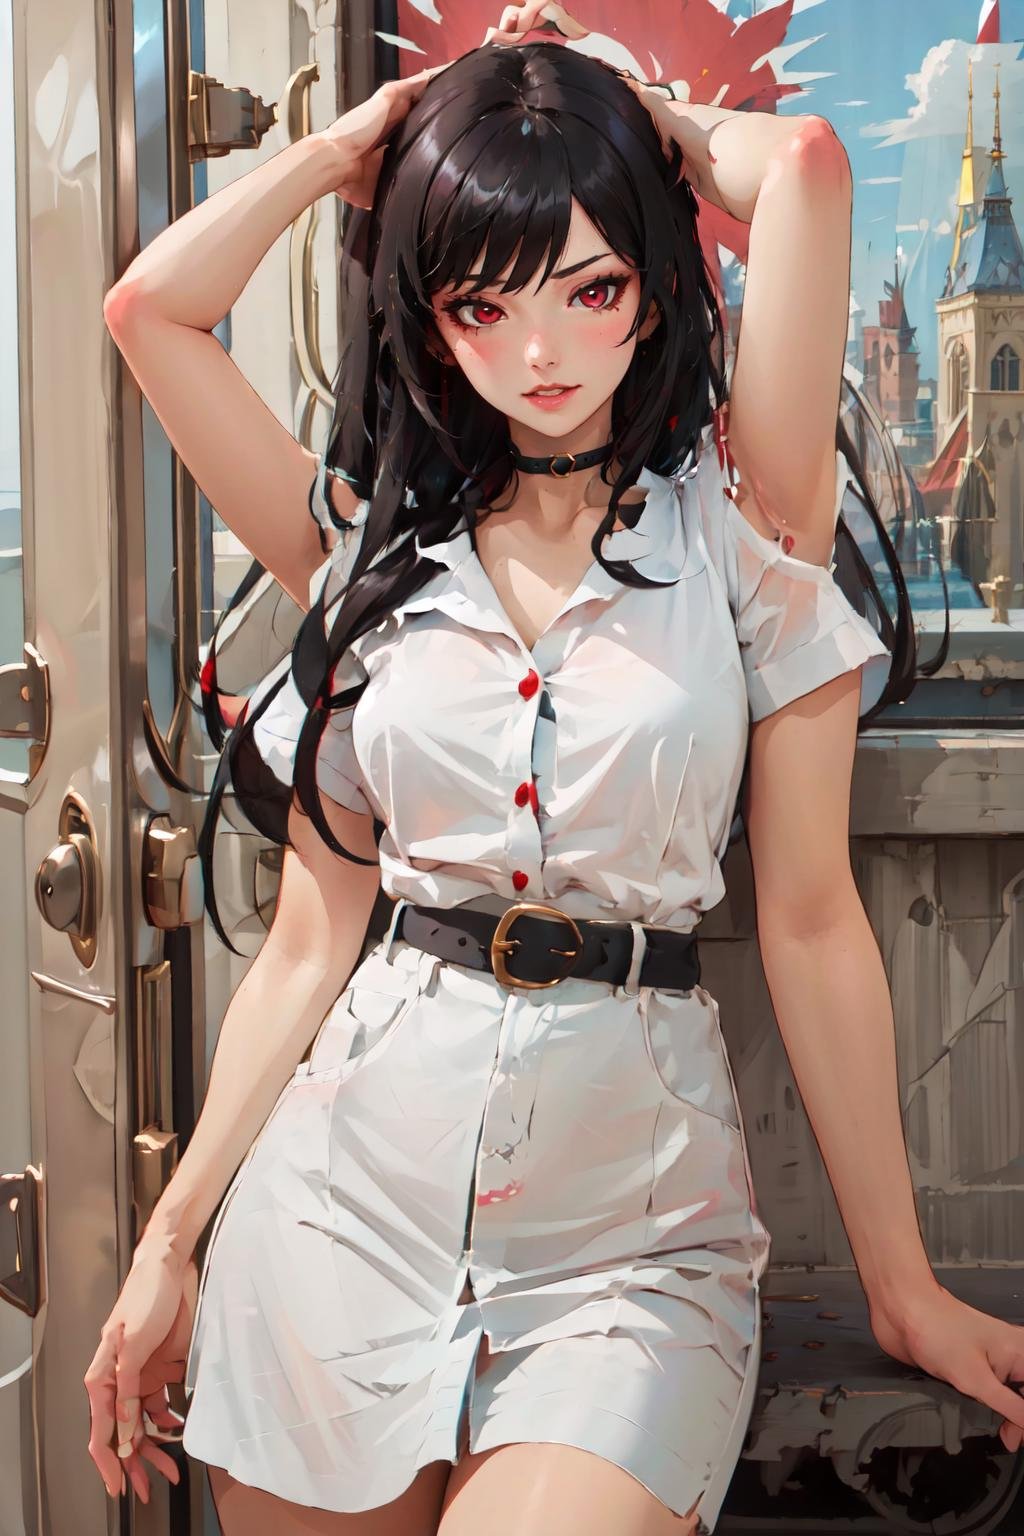 Highly detailed, High Quality, Masterpiece, beautiful, 1girl, ExtraArms, <lora:ExtraArms:1.0>, Nevin, red eyes, white shirt, <lora:Char_OC_Nevin:0.75>, black hair, edgEV, wearing edgEV_vintage dress, <lora:Outfit_EuropeanVintage:0.8>